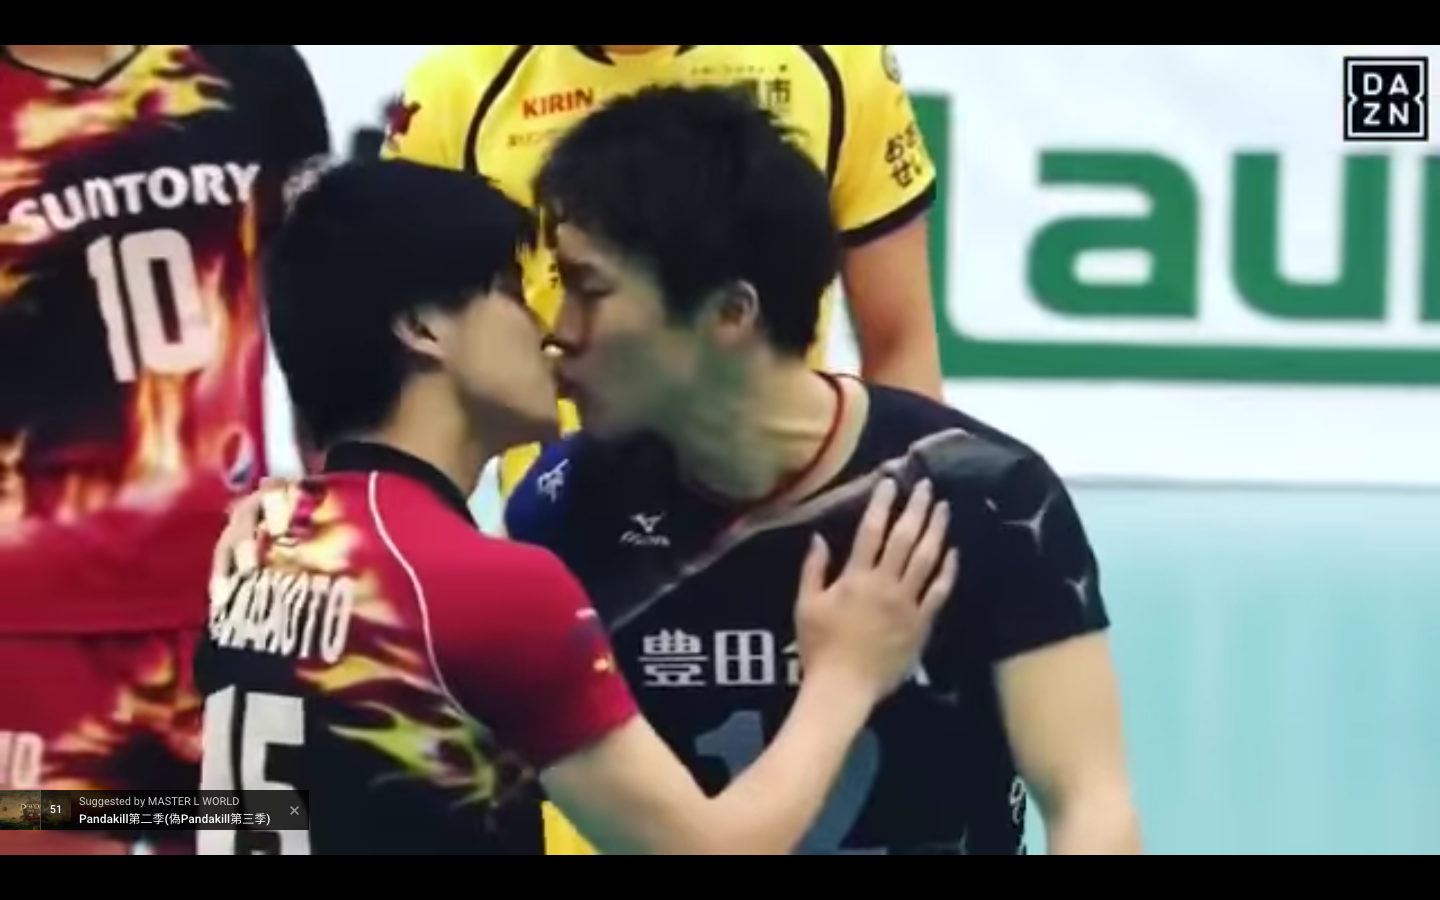 Watch: Volleyball Players Settle Dispute With a Kiss